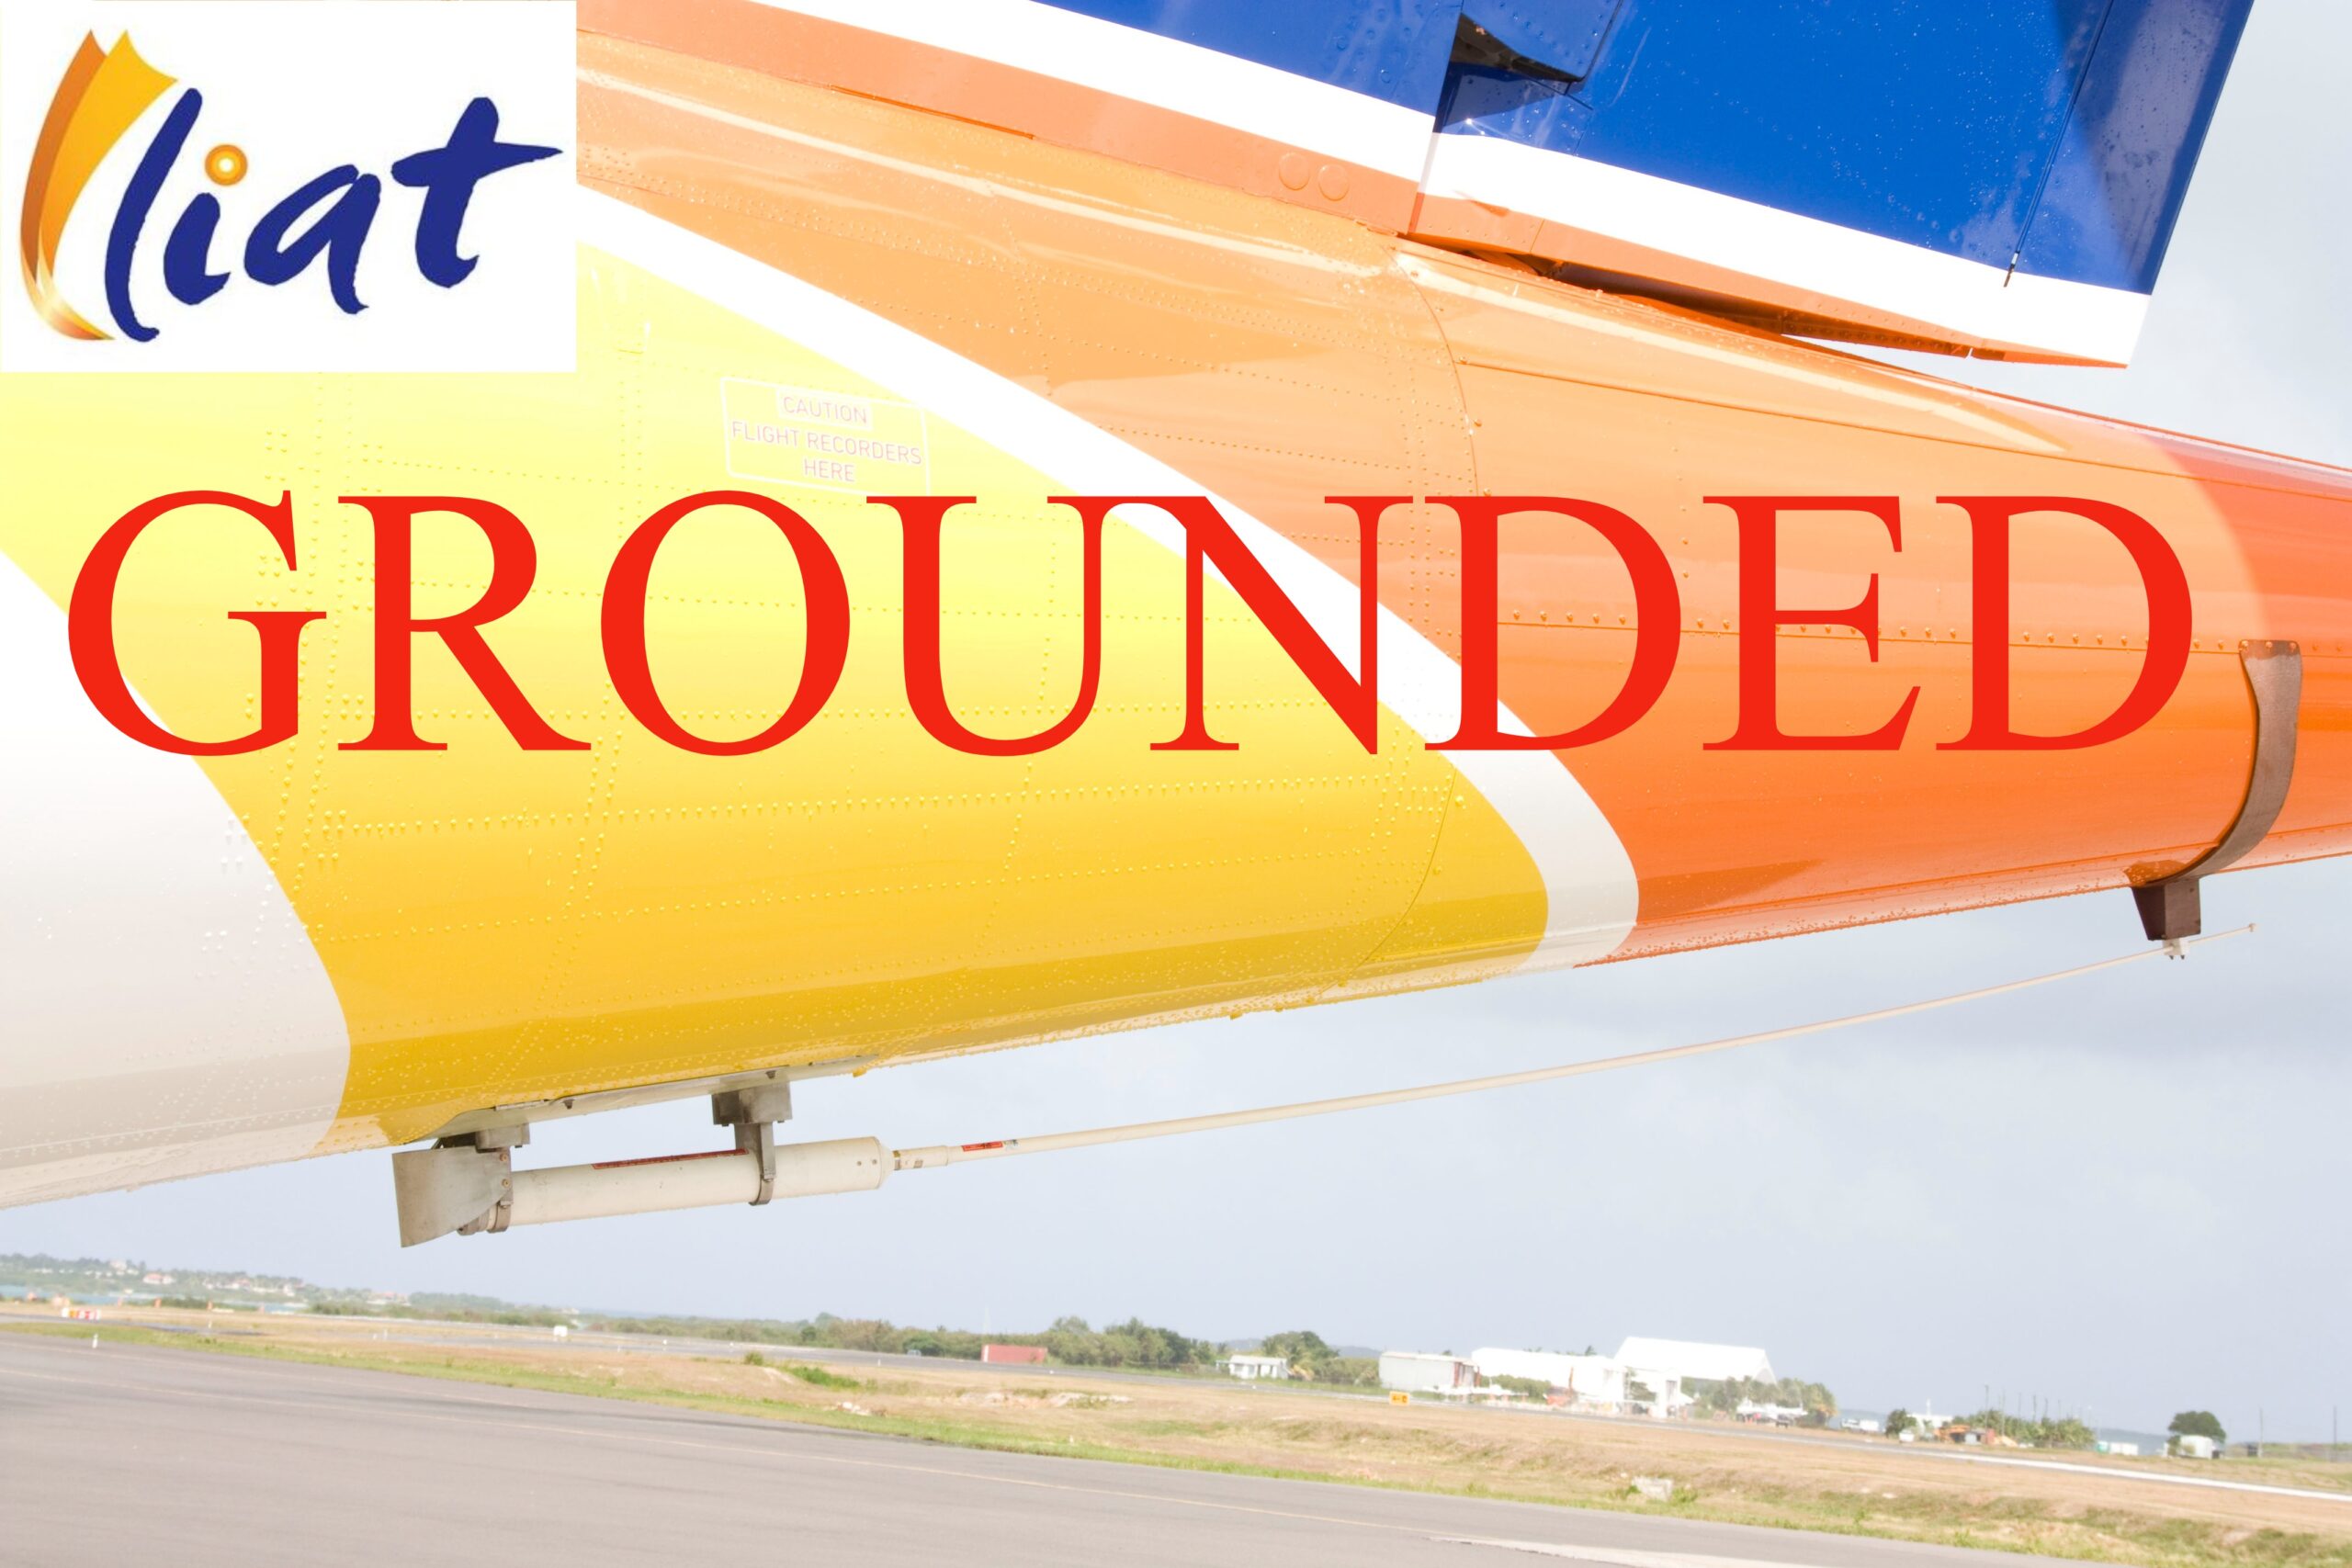 Disruption in LIAT’s schedule appears to foreshadow carrier’s demise, as residents say PM Browne lacks capacity to revive it